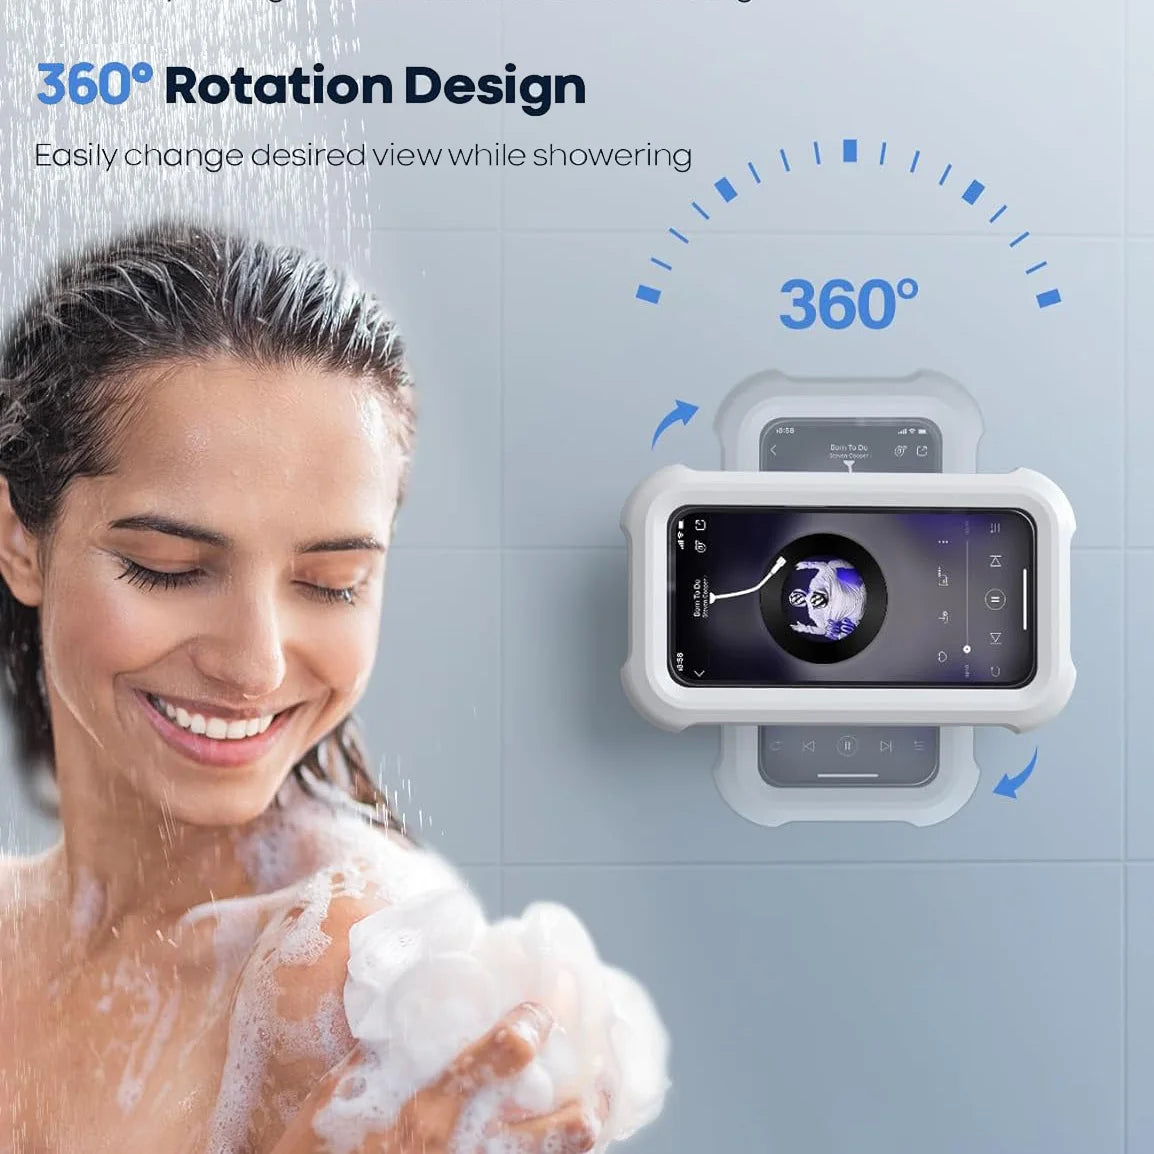 Shower Phone Holder Waterproof 480 Degree Rotation Adjustable Wall Phone Mount for Shower,Bathroom Bathtub Cell Phone Stand